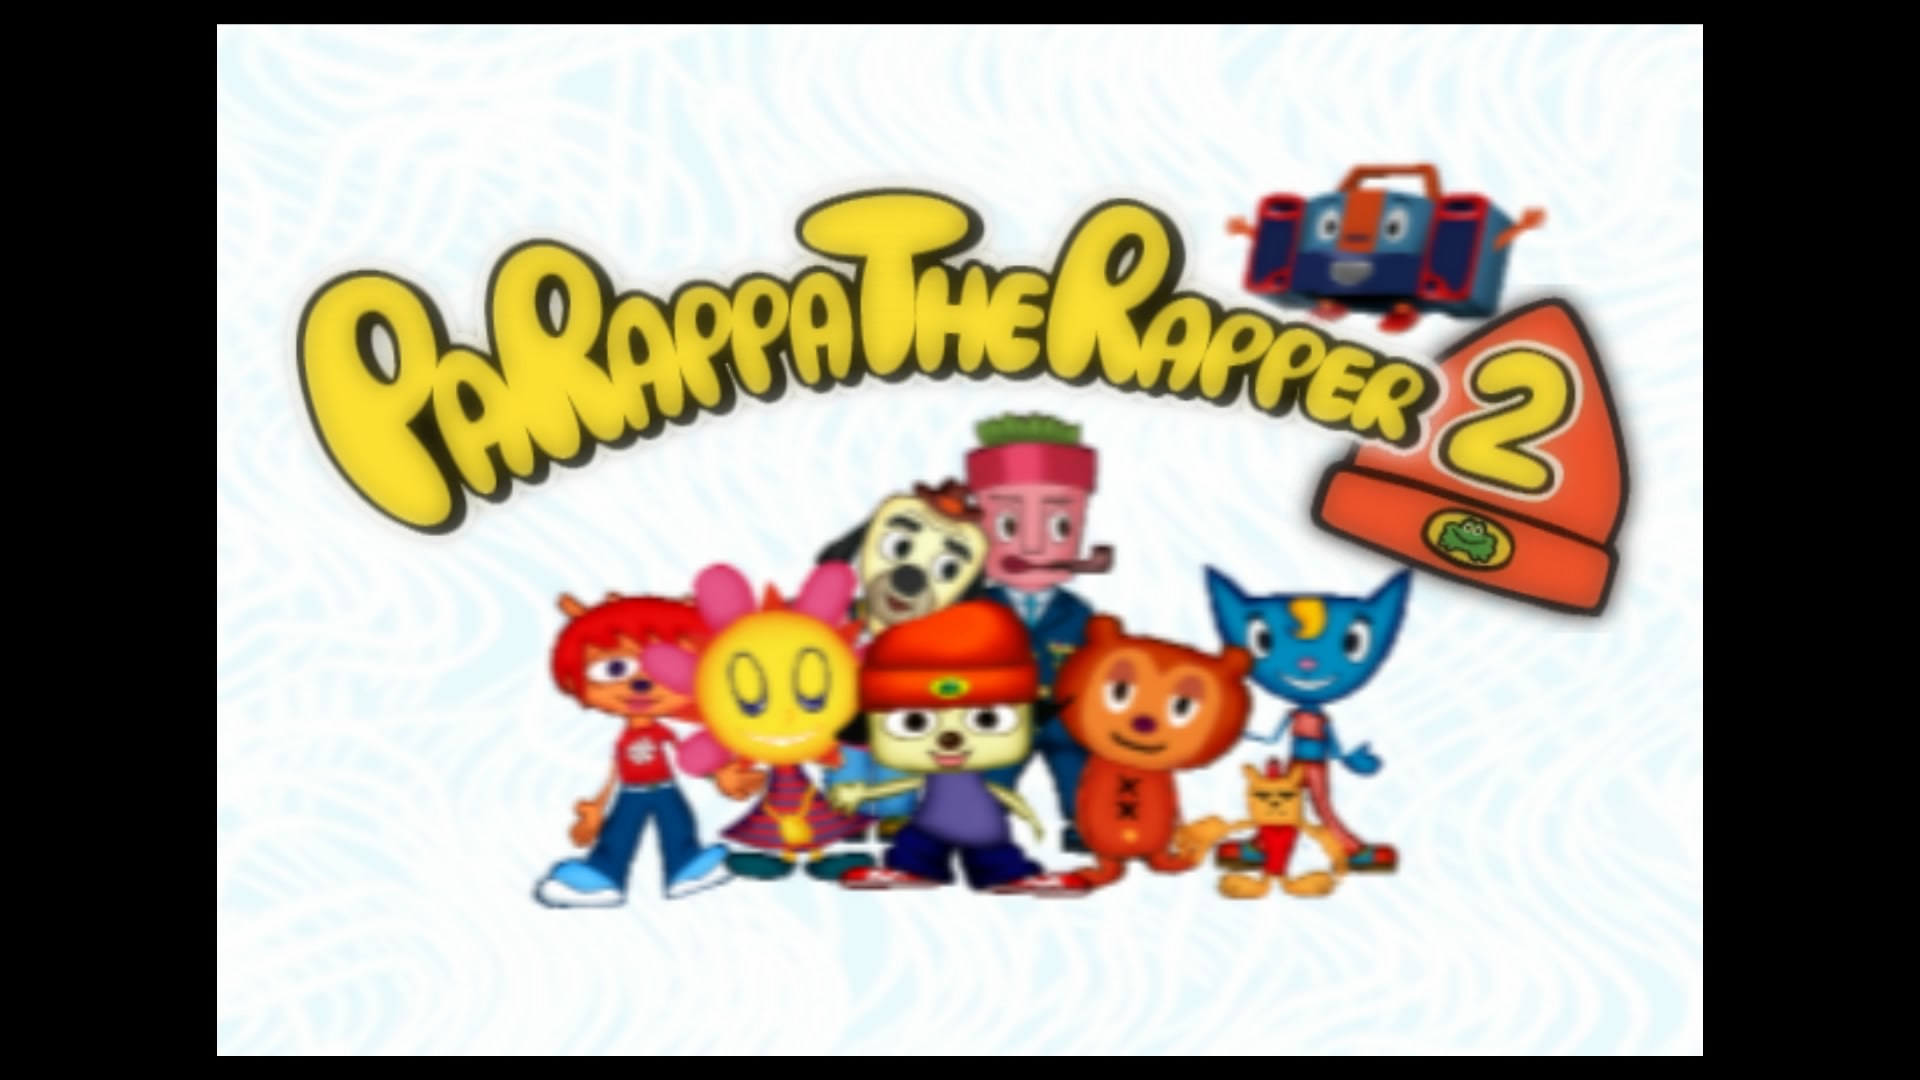 PlayStation 2 - PaRappa the Rapper 2 - PaRappa (Astronaut) - The